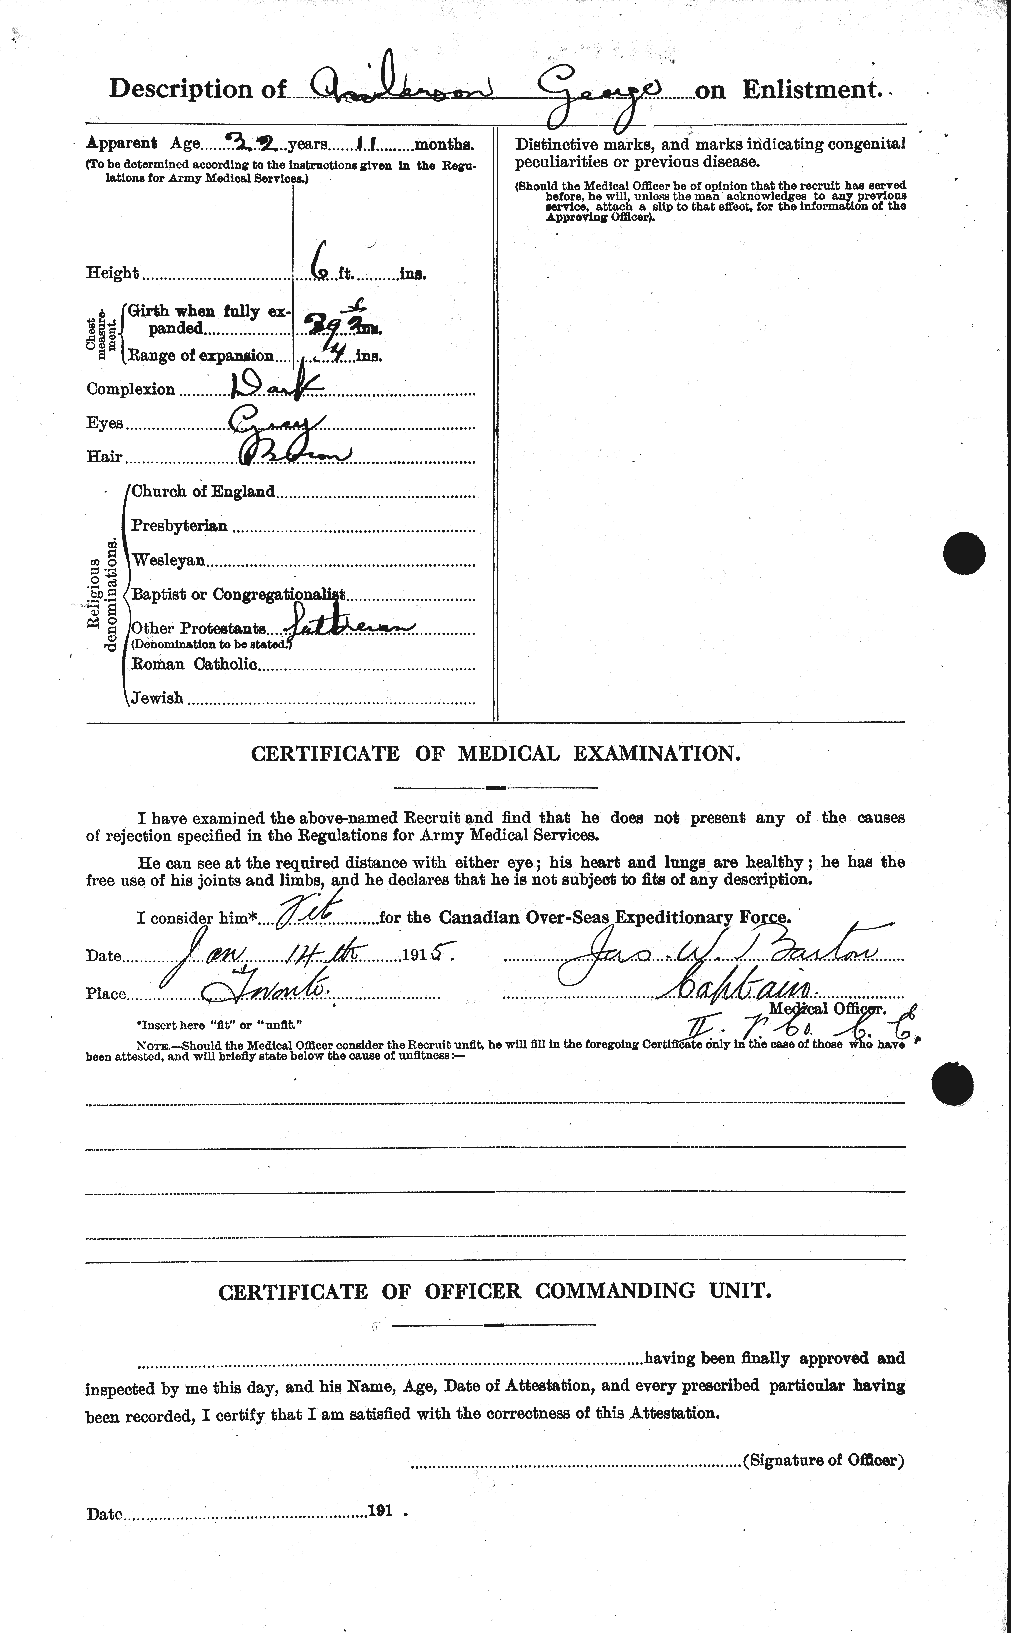 Personnel Records of the First World War - CEF 209768b